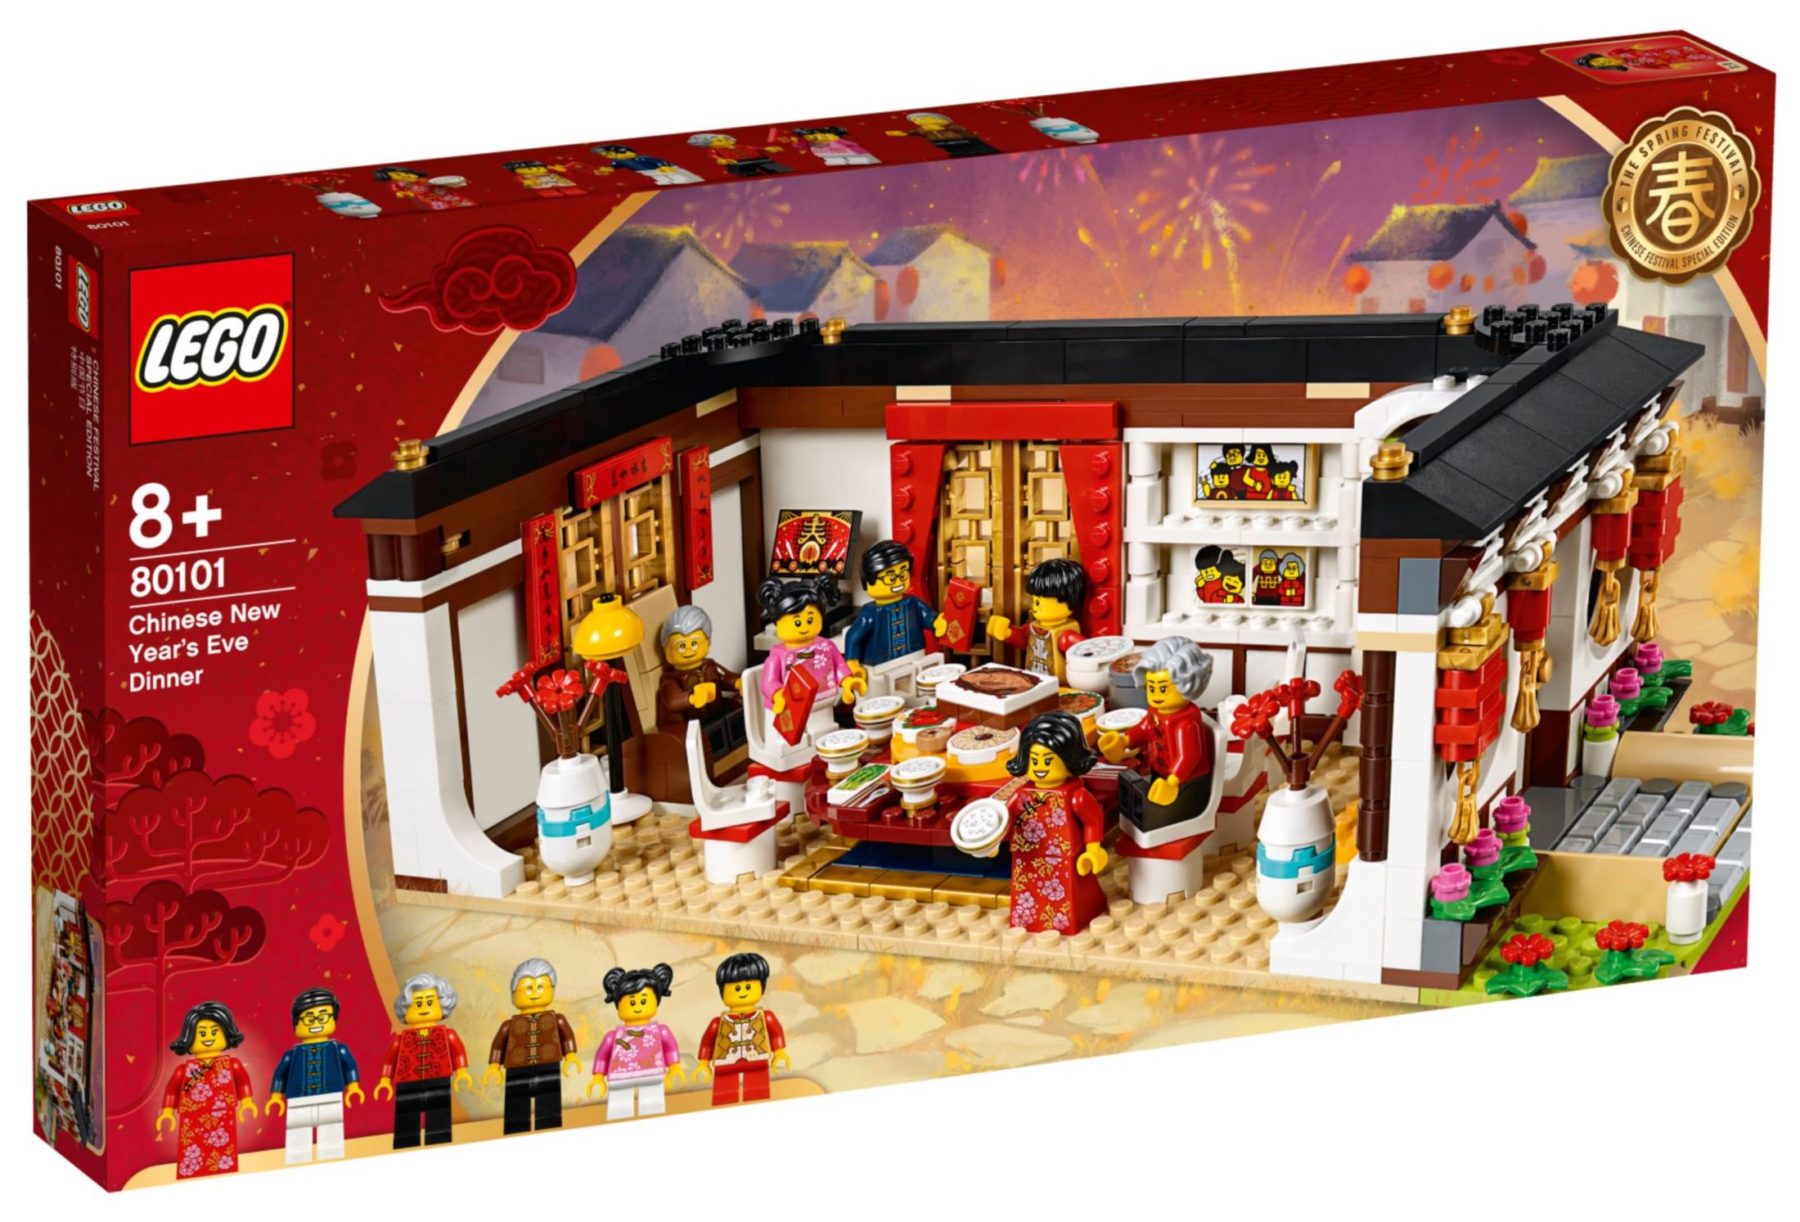 LEGO 80101 Chinese New Years Eve Dinner Box